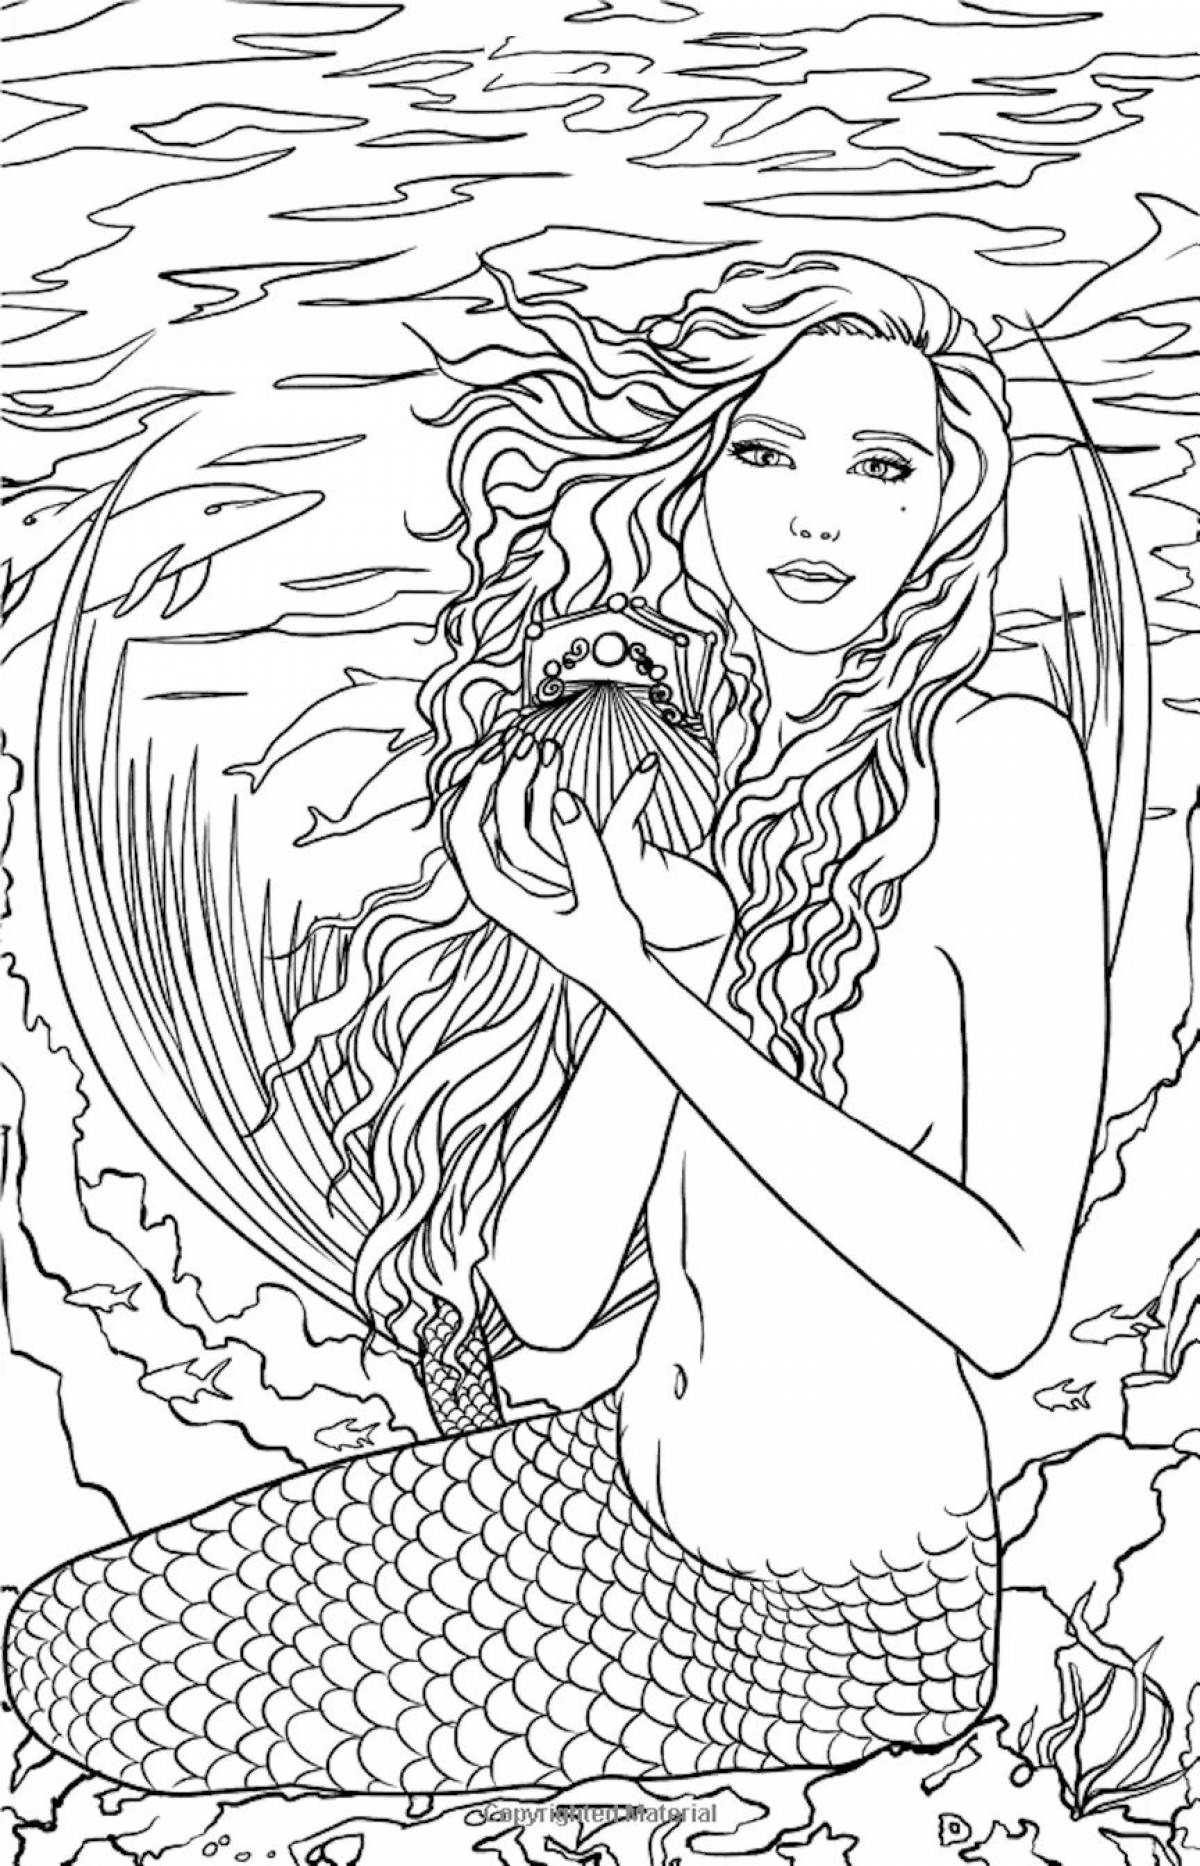 Exciting coloring mermaid complex